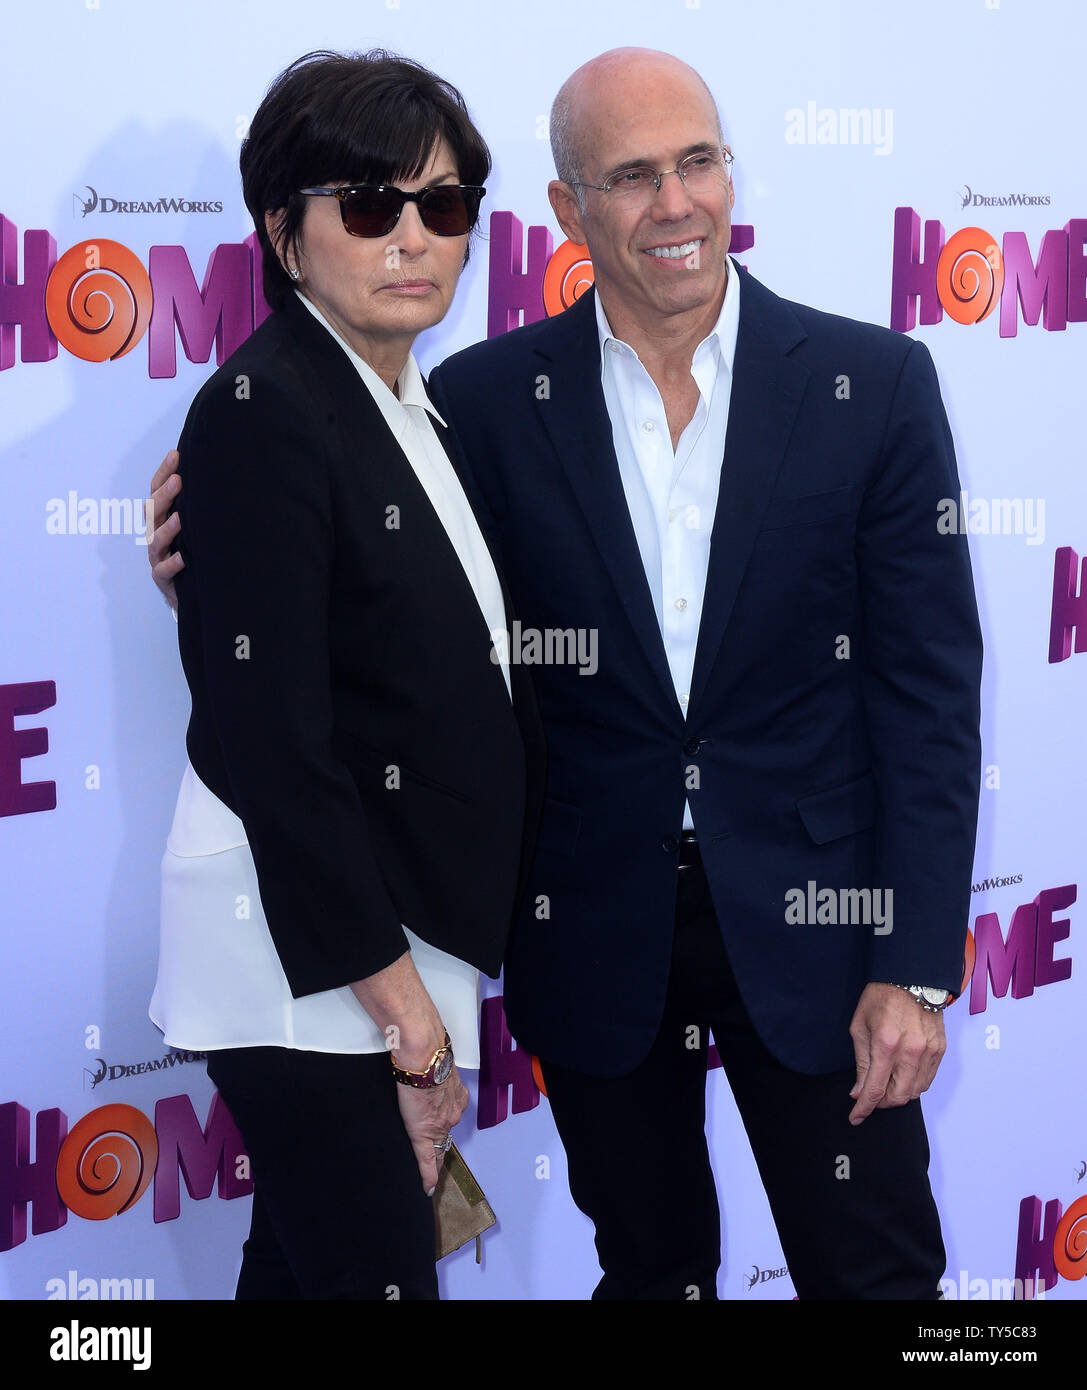 Producer Jeffrey Katzenberg and his wife Marilyn attend the premiere of the animated sci-fi comedy 'Home' at the Regency Village Theatre in the Westwood section of Los Angeles on March 22, 2015. Storyline: Oh (Jim Parsons), an alien on the run from his own people, lands on Earth and makes friends with the adventurous Tip (Rihanna), who is on a quest of her own.  Photo by Jim Ruymen/UPI Stock Photo